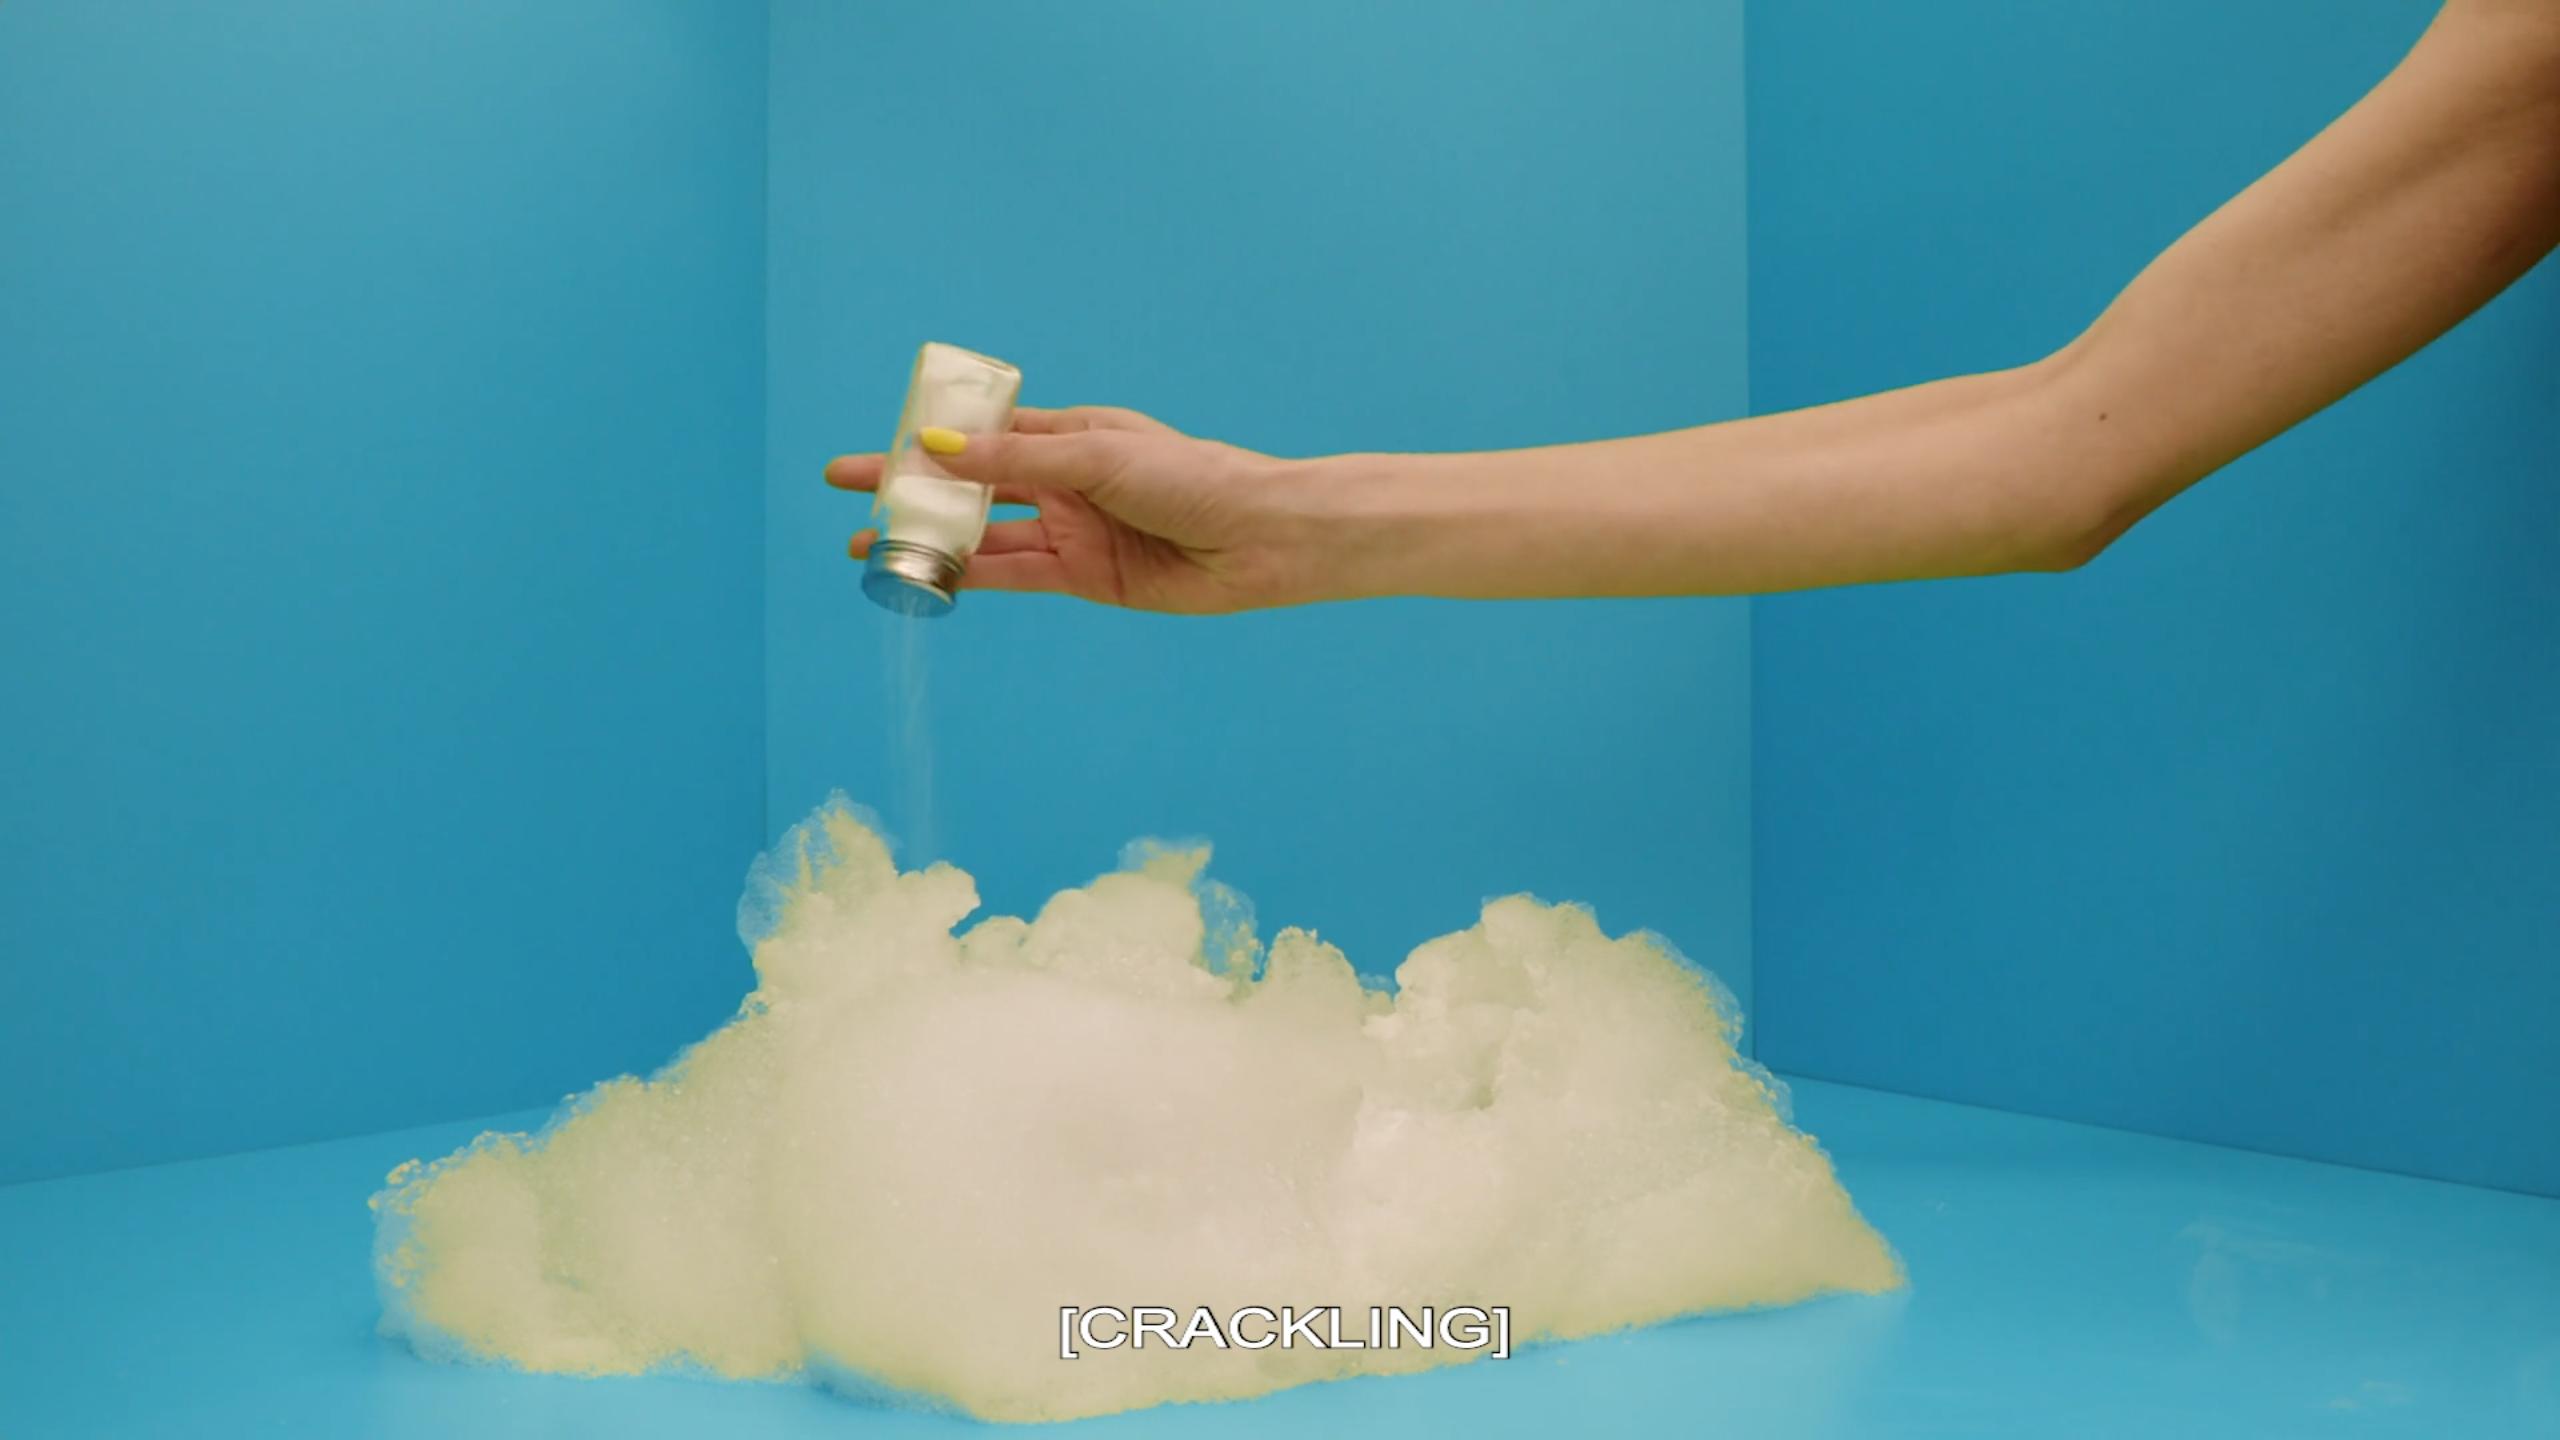 An arm extends into a blue room, shaking salt onto a cloud-like mass. Text on the image says [CRACKLING].